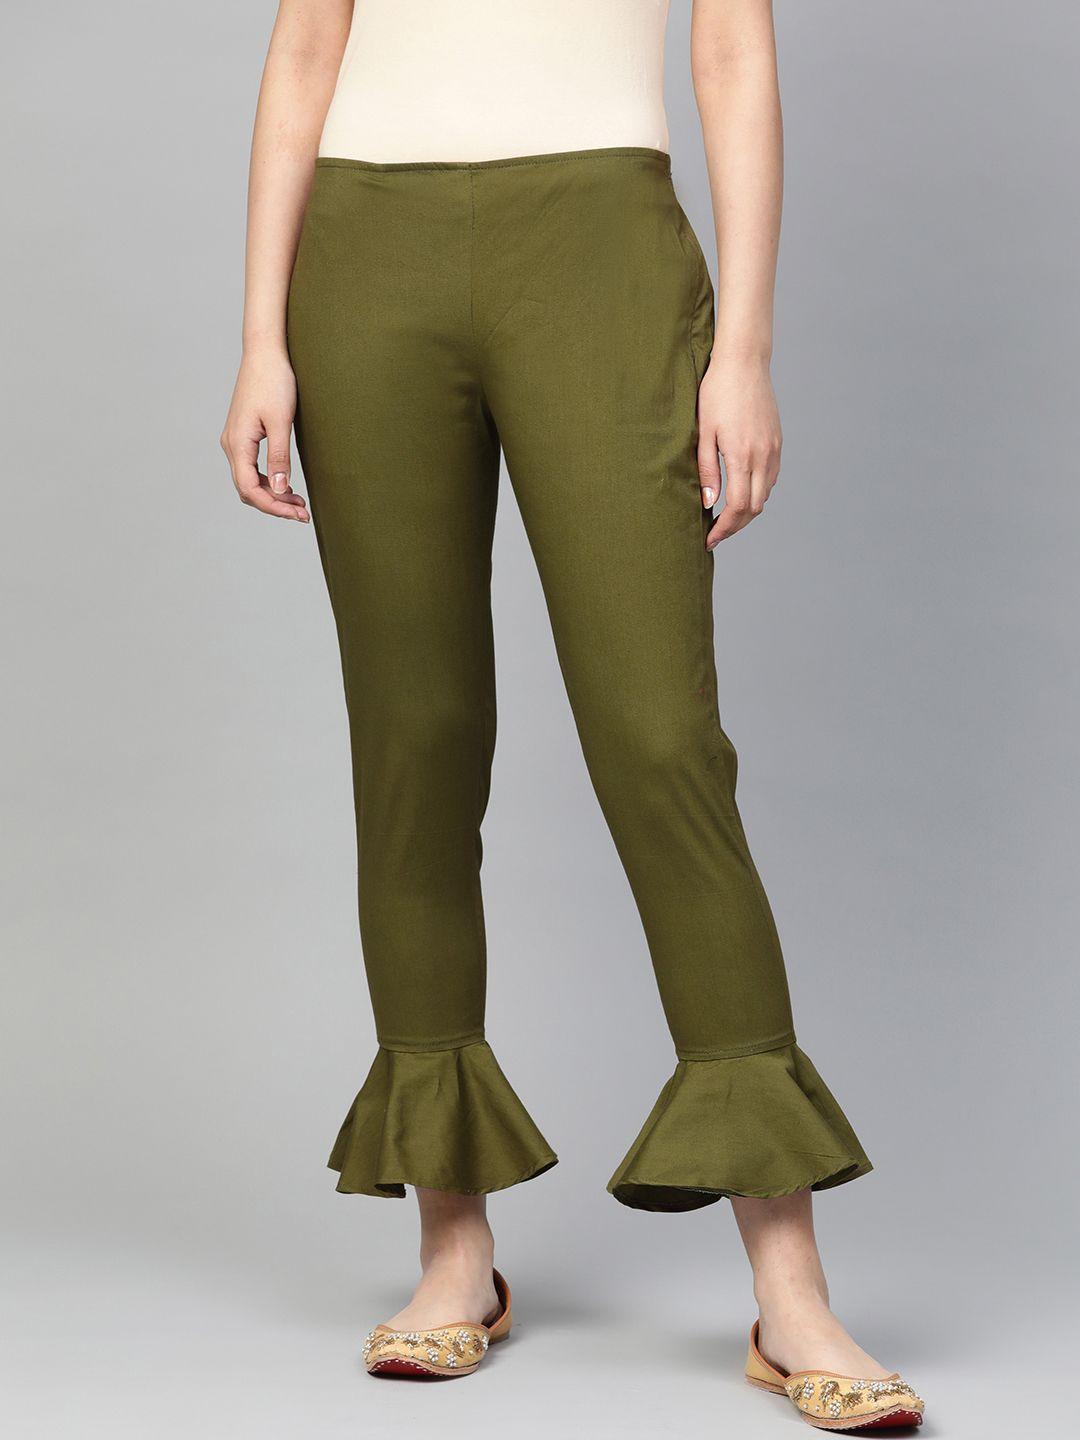 jompers women olive green smart slim fit solid trousers